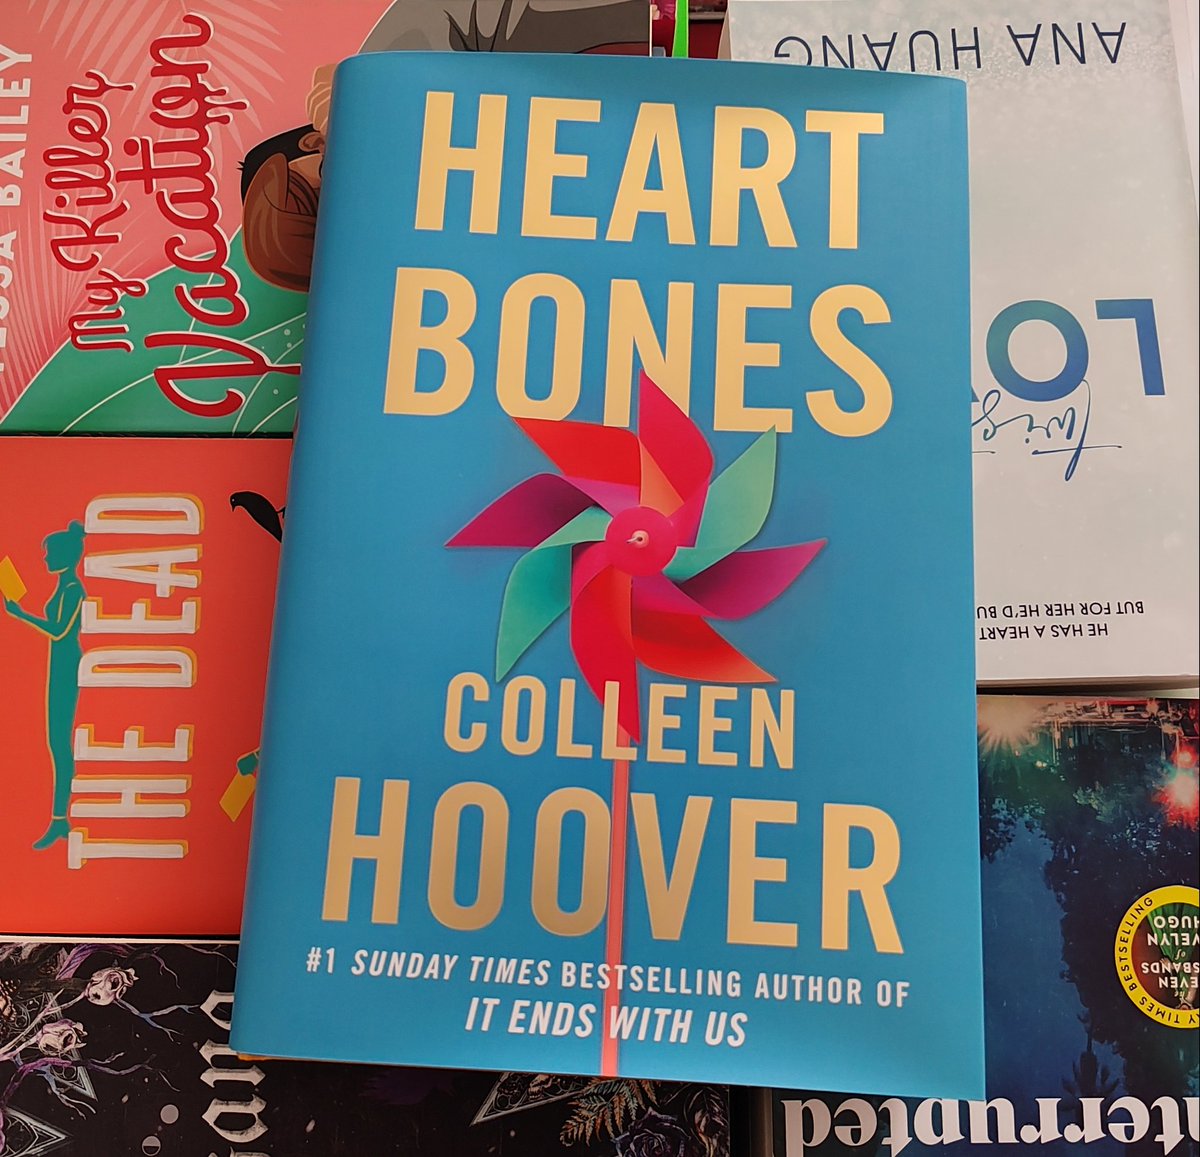 Heartbones by CoHo is definitely one of her more underrated books yet soooo good 😍

It's more a YA love story that explores some heavy topics 😁

5⭐

Full review 👇
tinyurl.com/48trp4vh